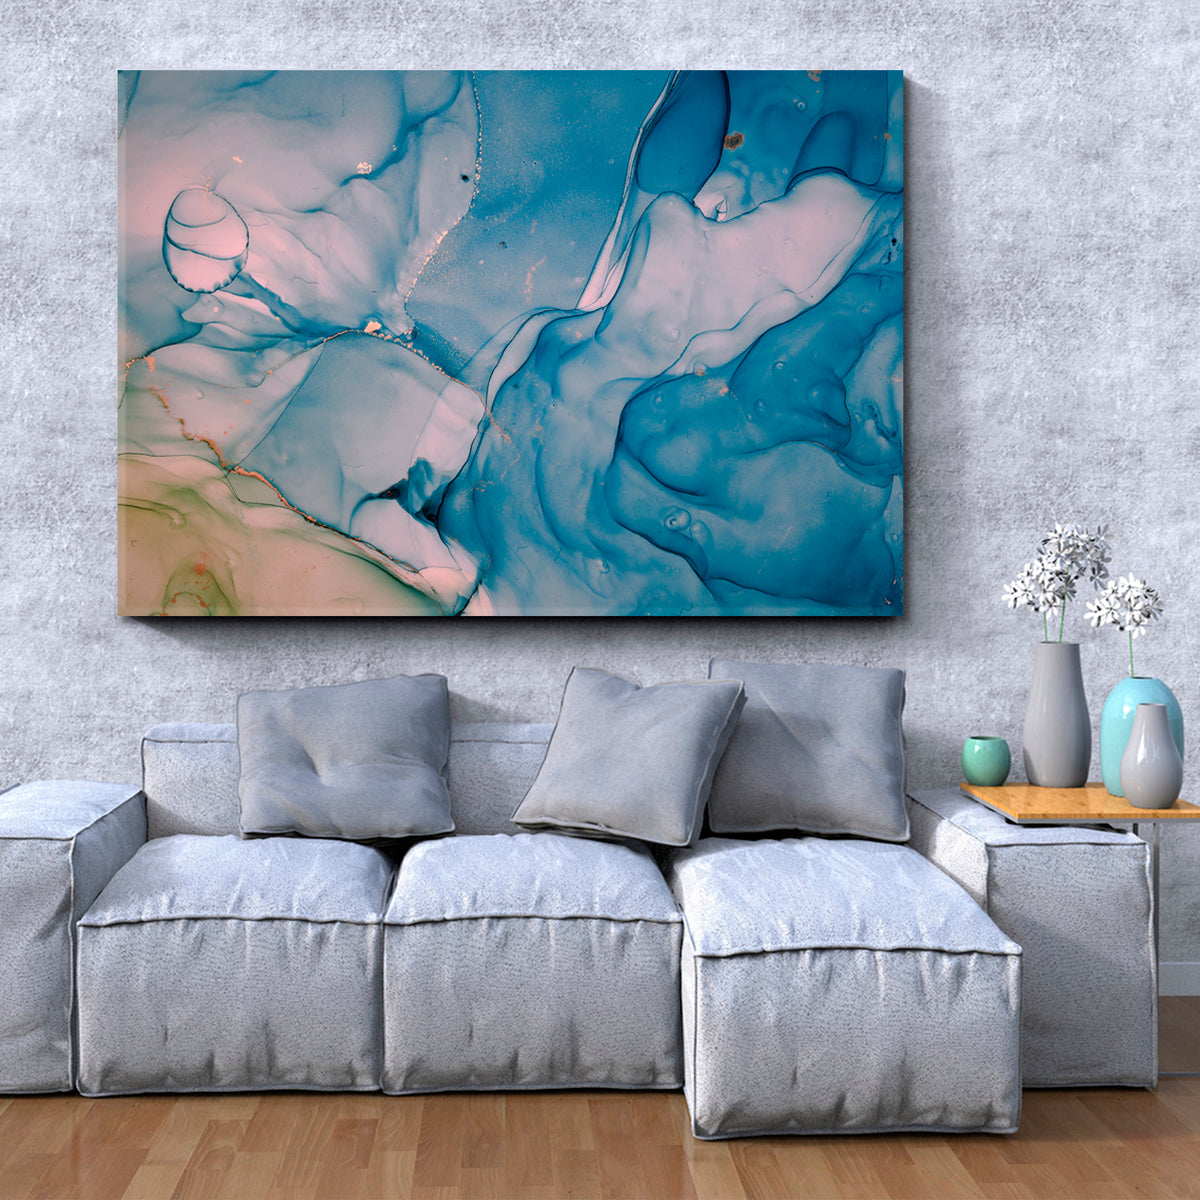 ABSTRACT SKY LANDSCAPE Alcohol Ink Colors Translucent Marble Fluid Art, Oriental Marbling Canvas Print Artesty 1 panel 24" x 16" 